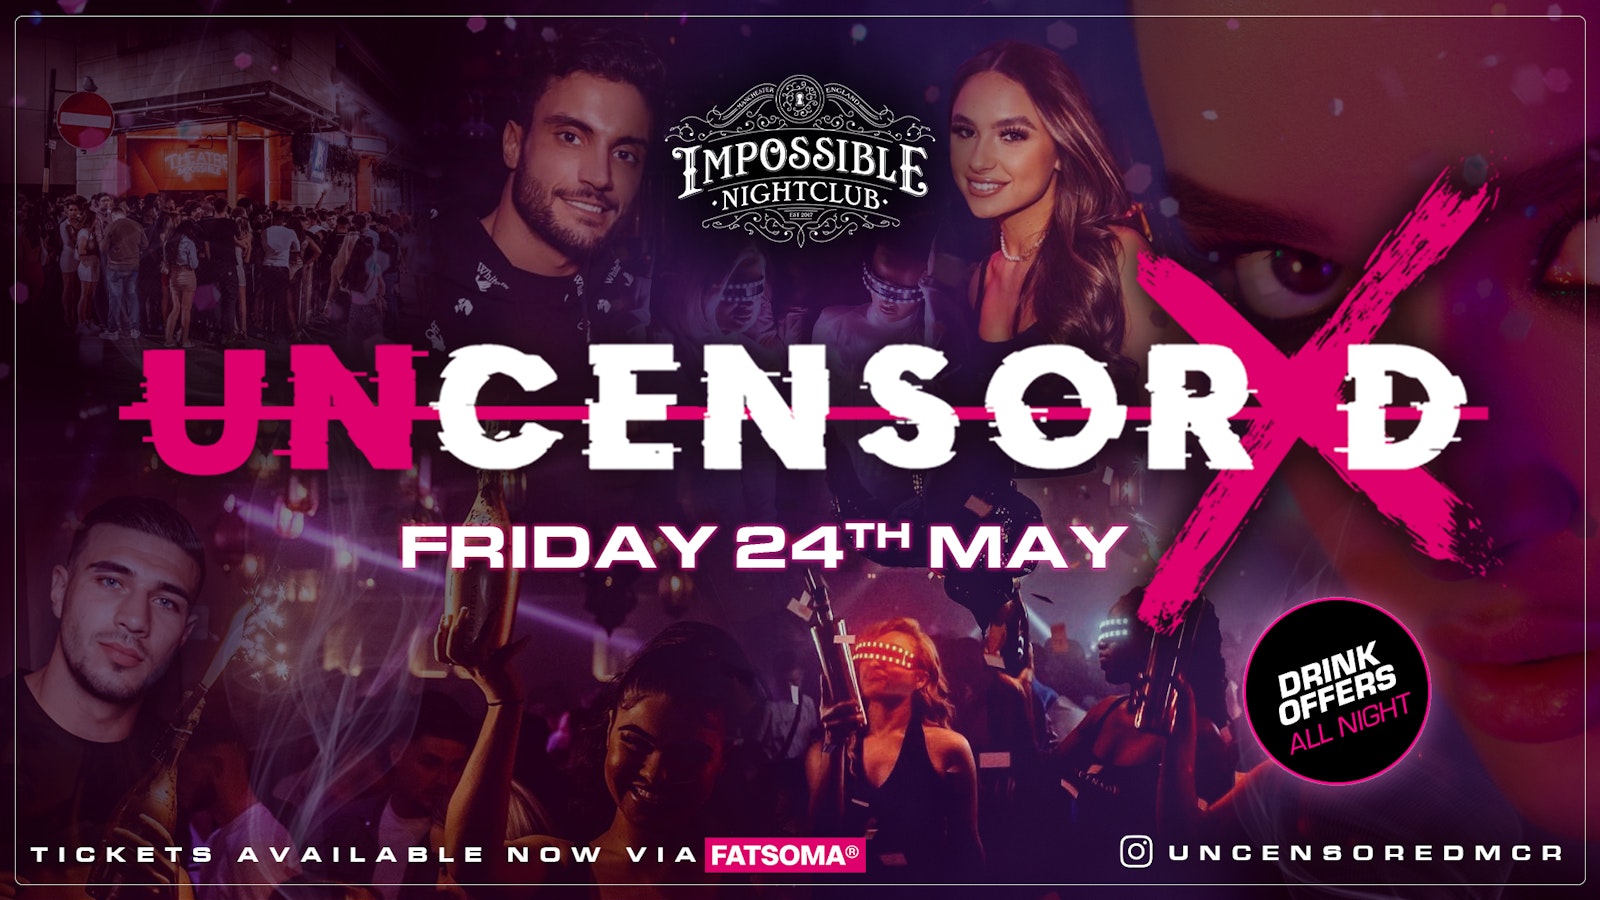 UNCENSORED FRIDAYS 🔞 IMPOSSIBLE Manchester’s Hottest Friday 😈